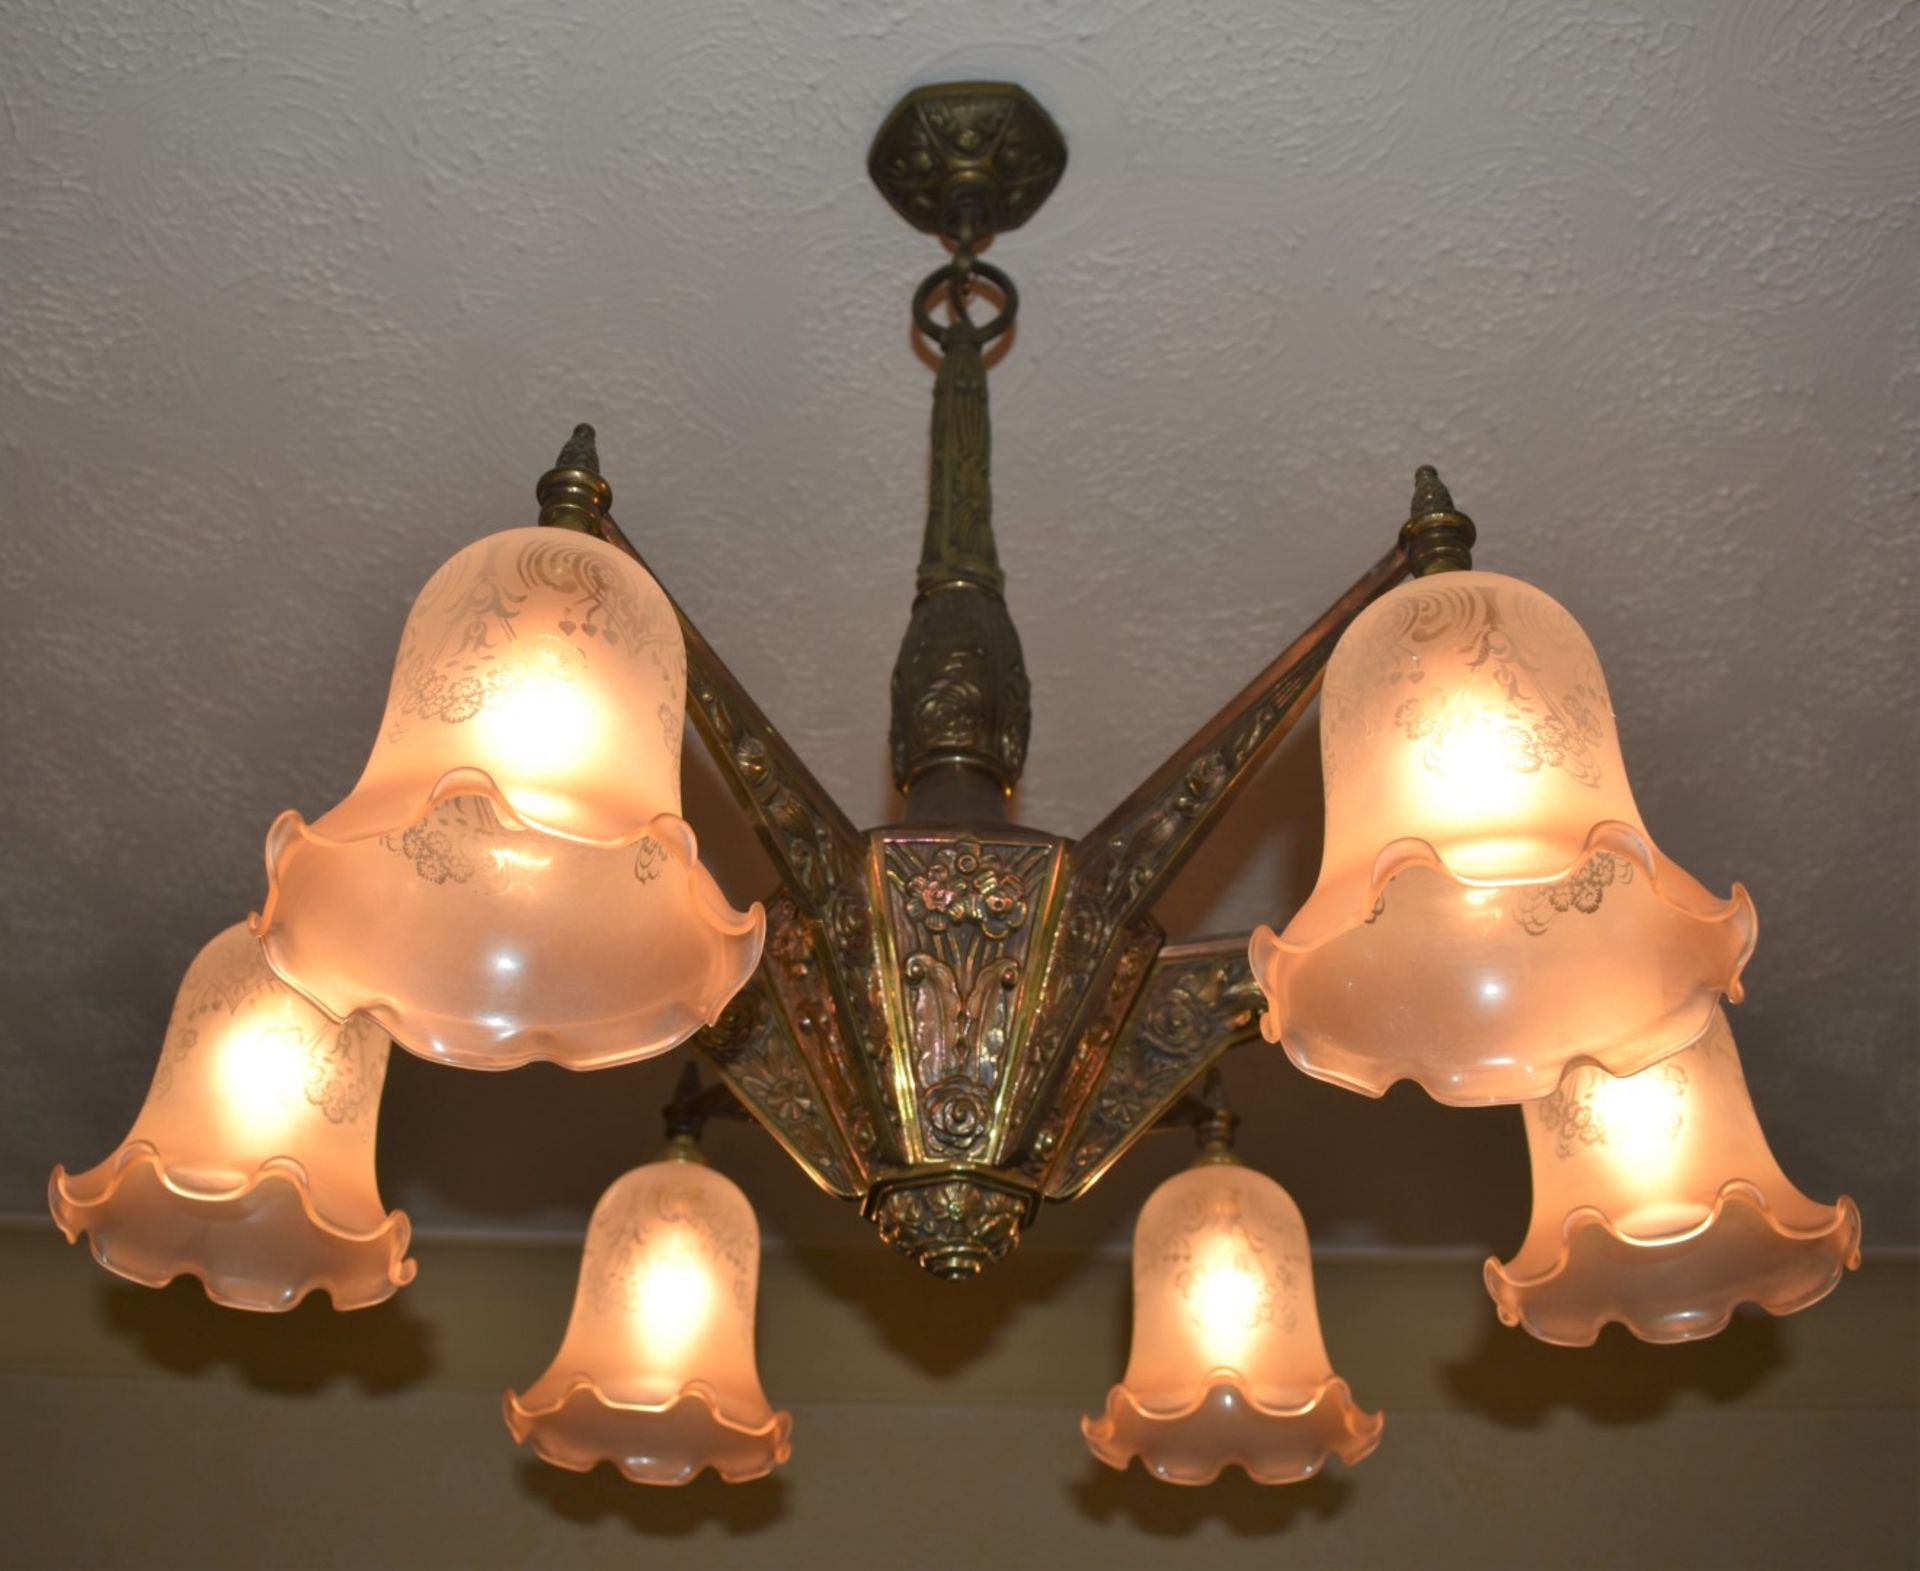 1 x Vintage 6 Light Bronze Chandelier With Frosted Glass Tulip Bell Shades - Dimensions: Drop 72 x - Image 6 of 14